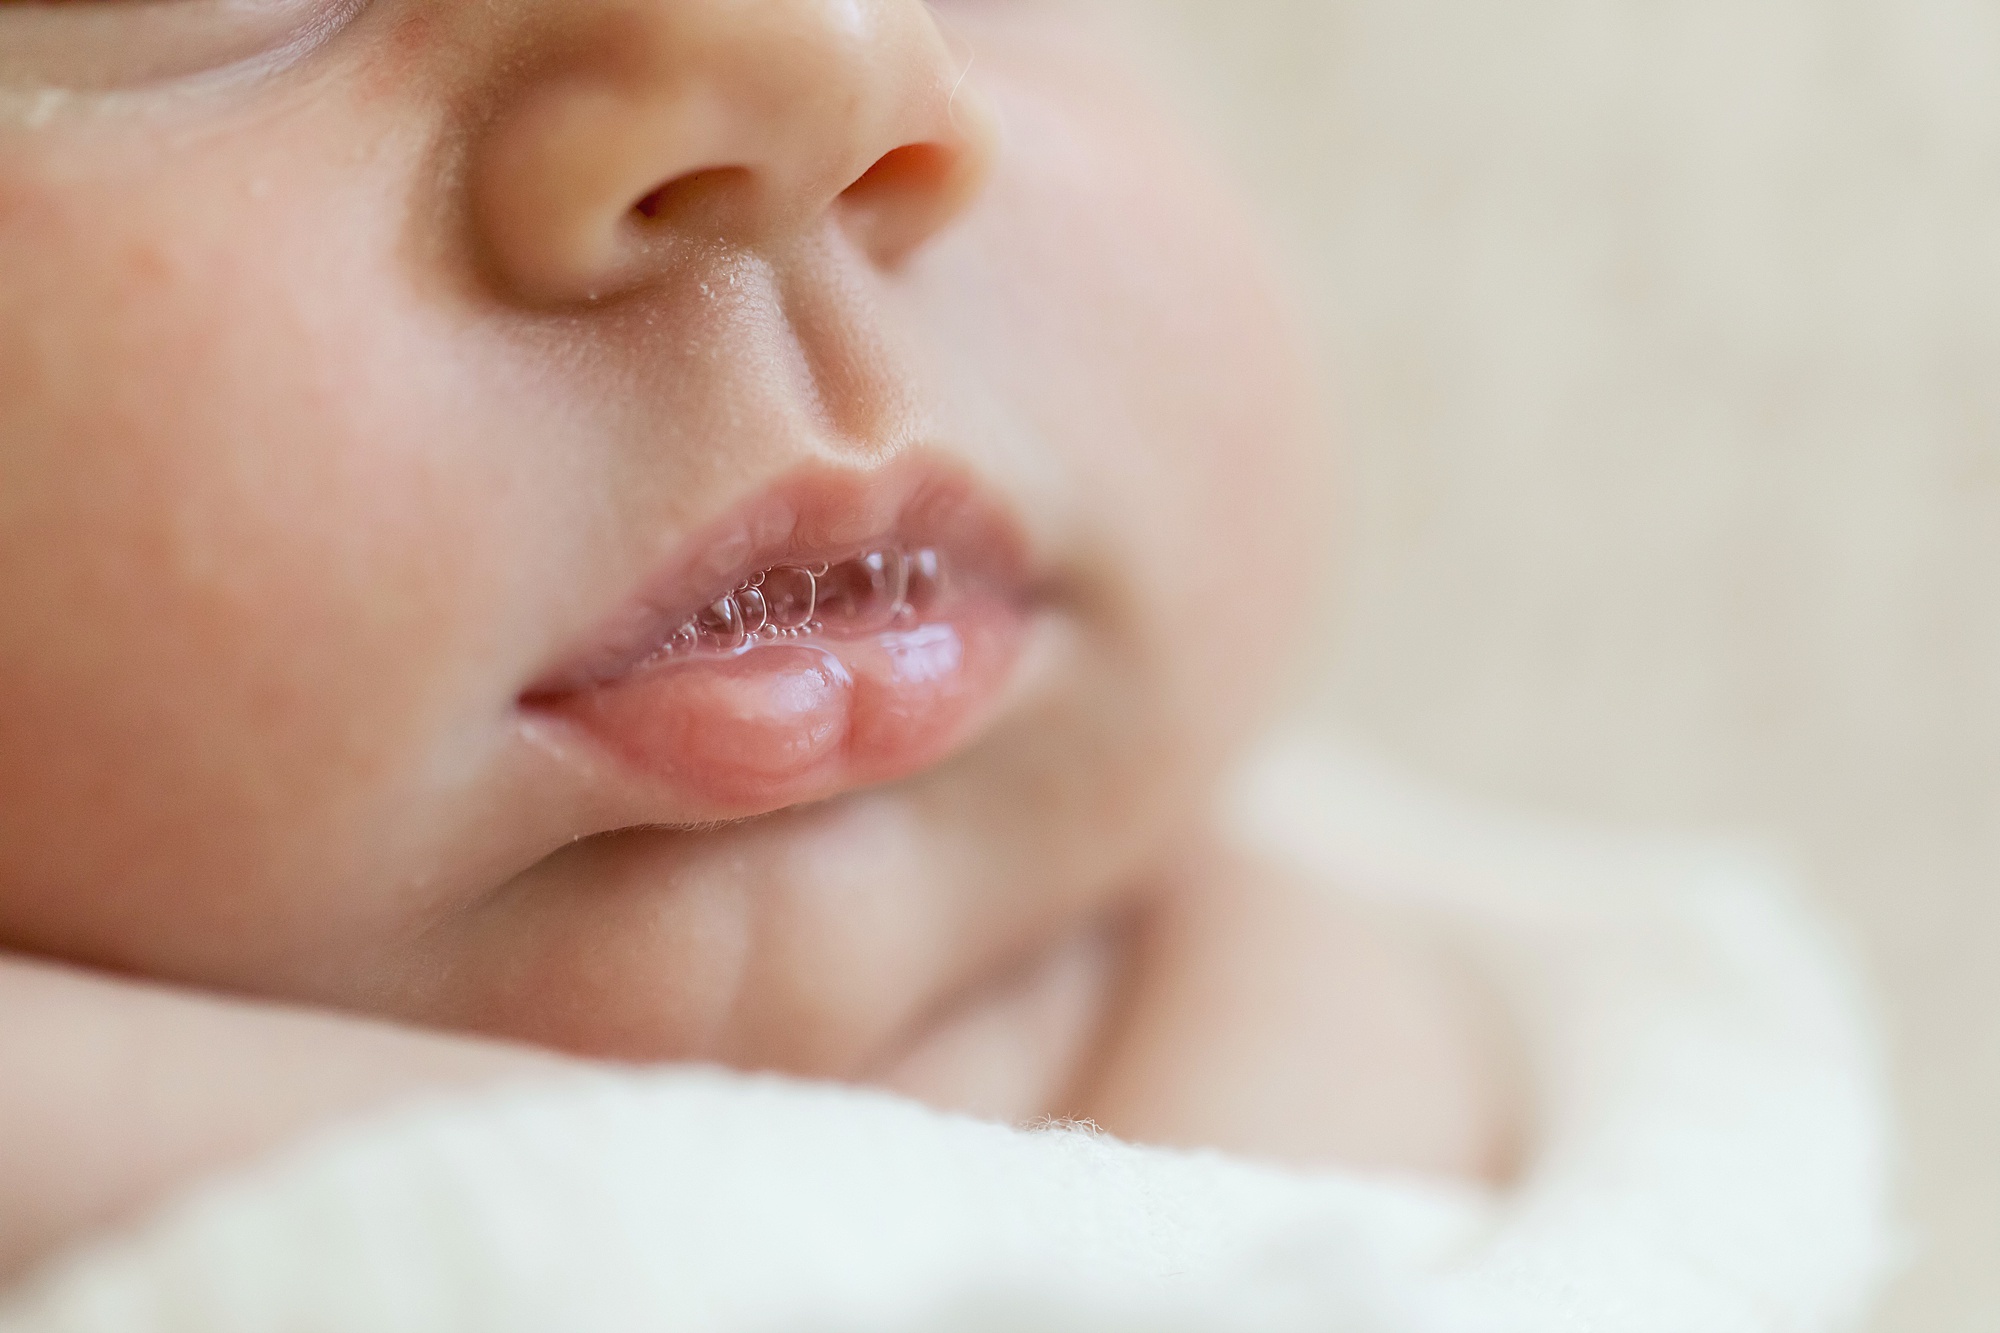 newborn lips with spit bubbles